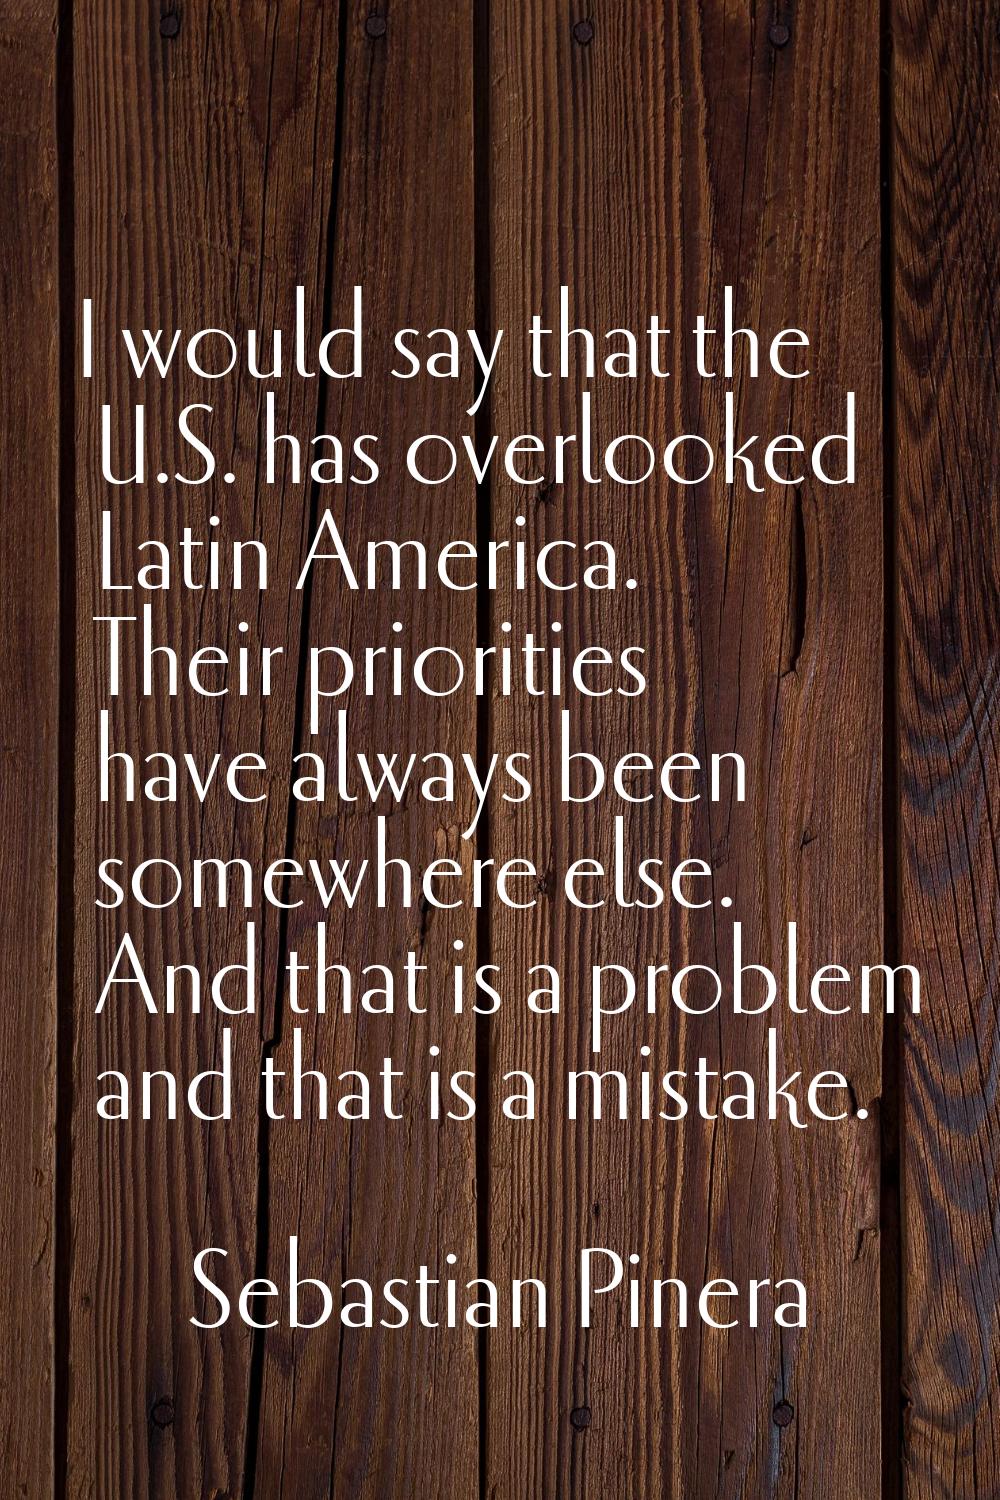 I would say that the U.S. has overlooked Latin America. Their priorities have always been somewhere